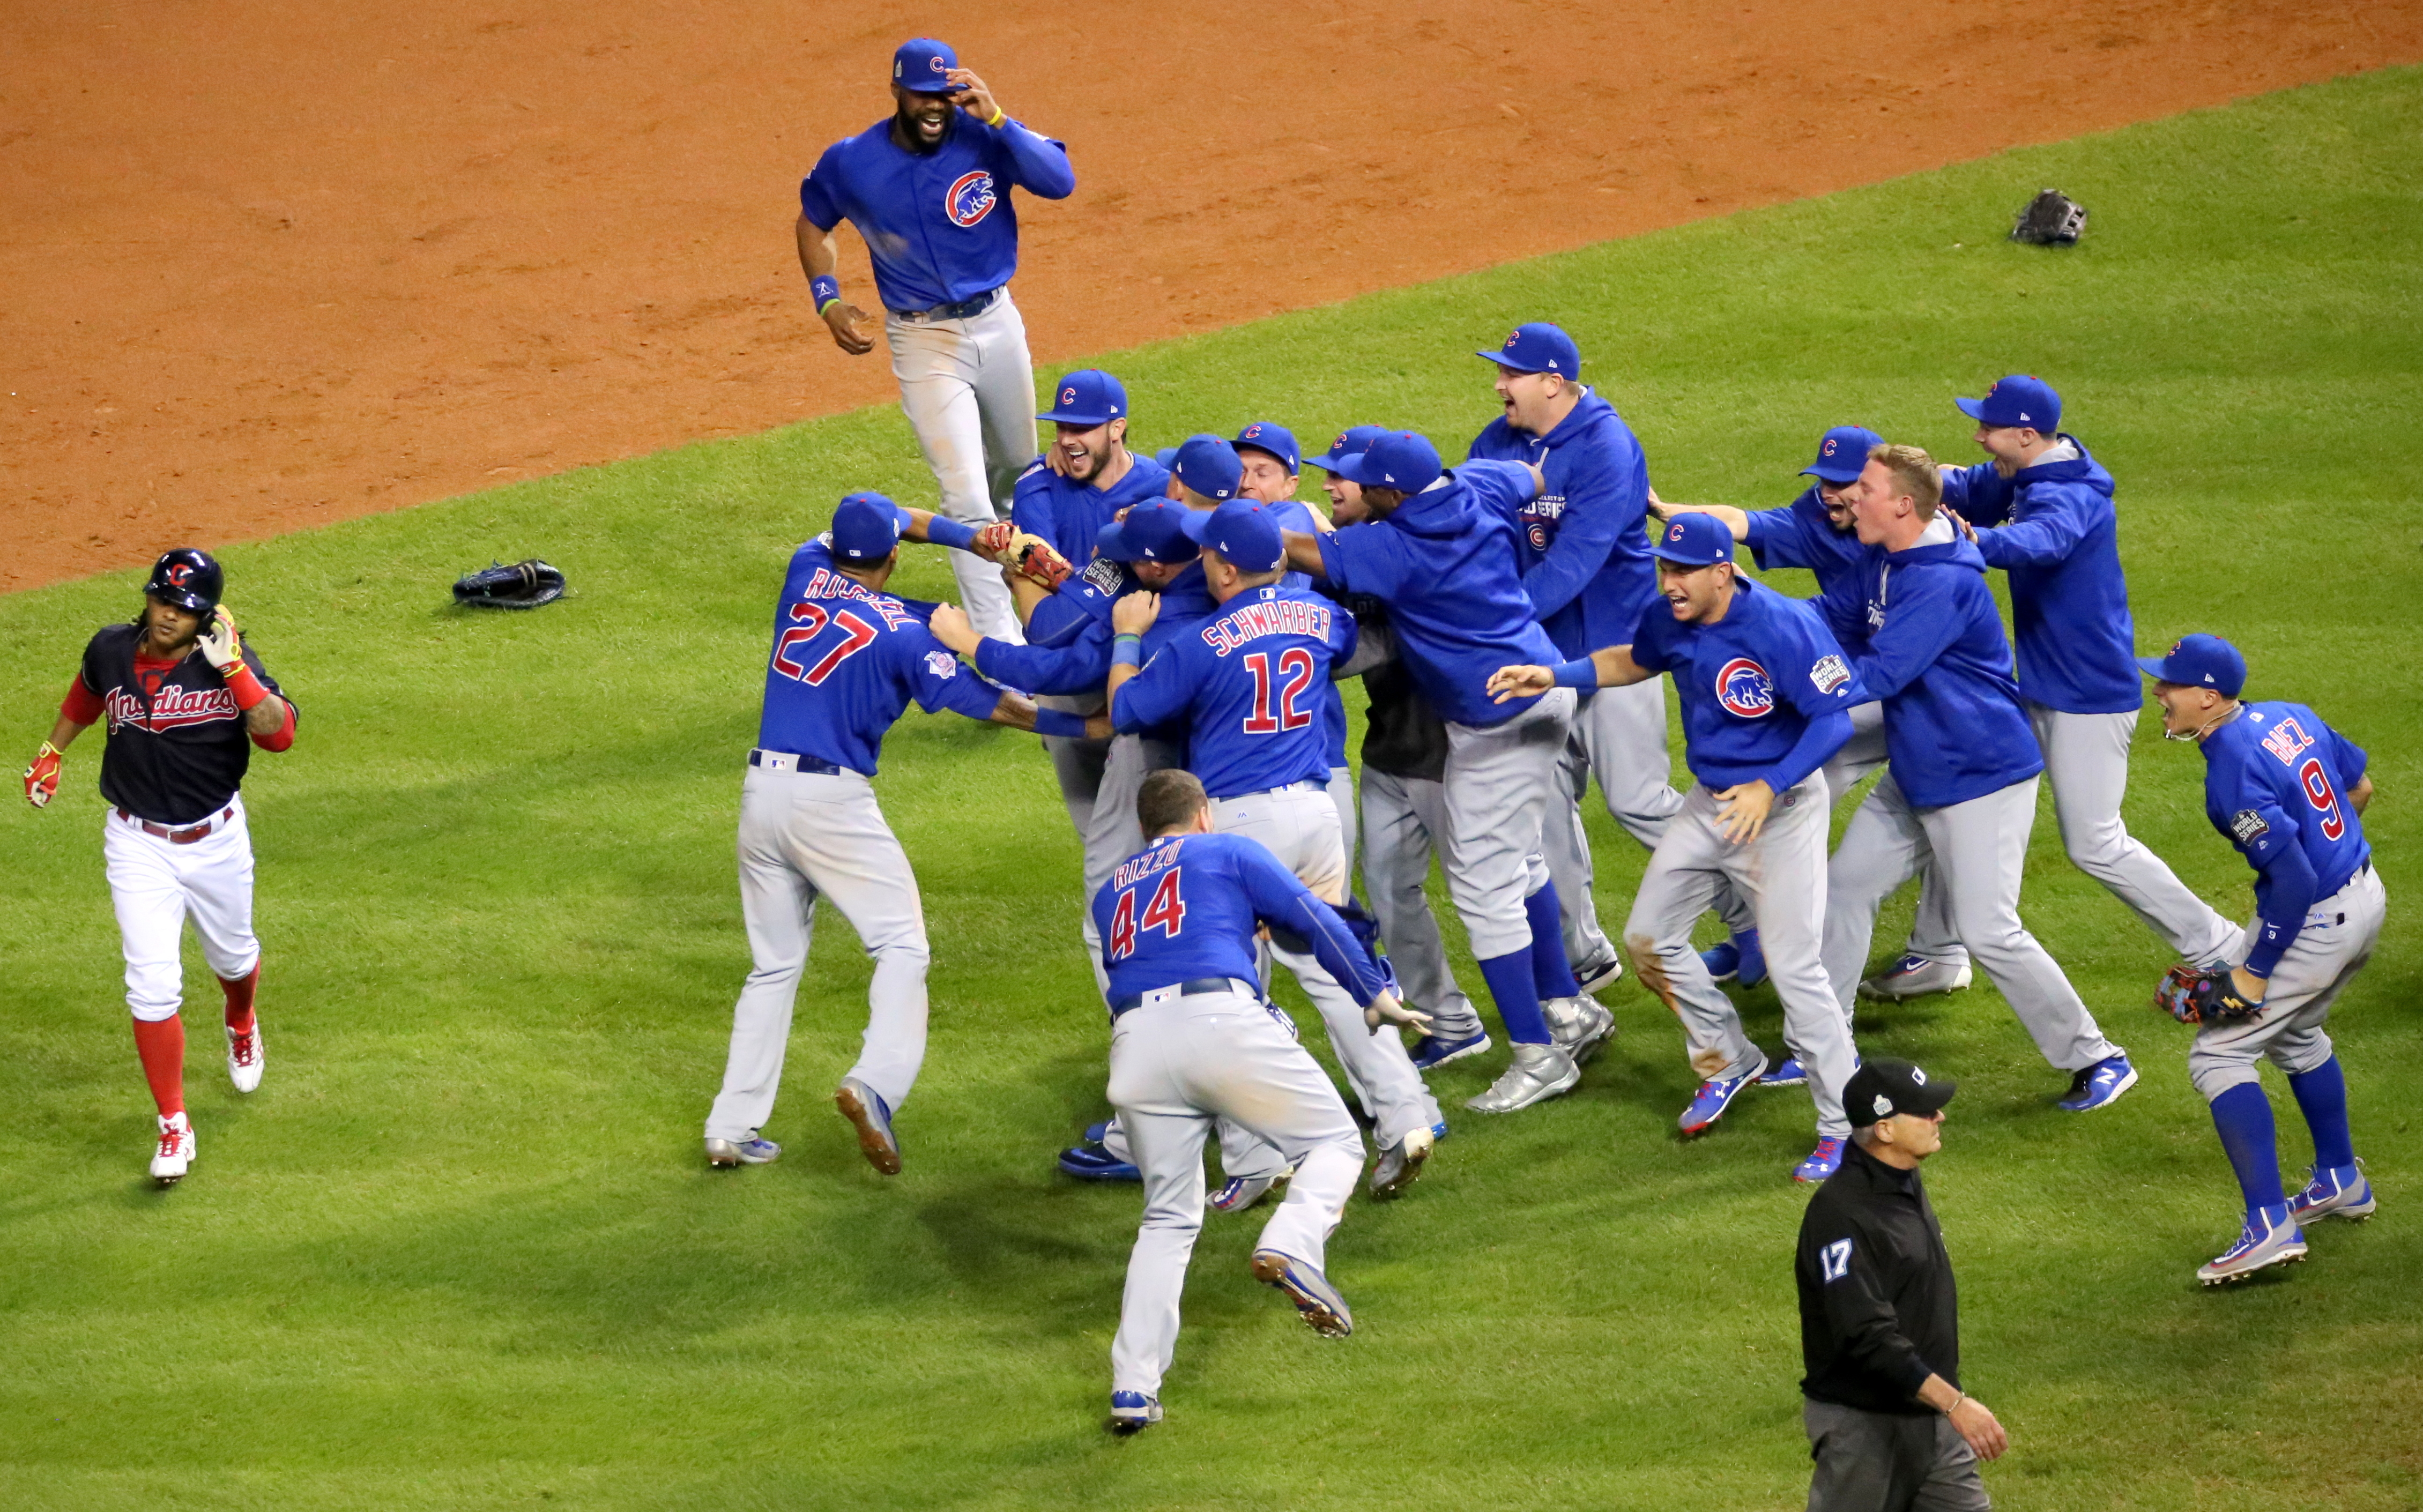 File:The Cubs celebrate after winning the 2016 World Series.jpg - Wikipedia